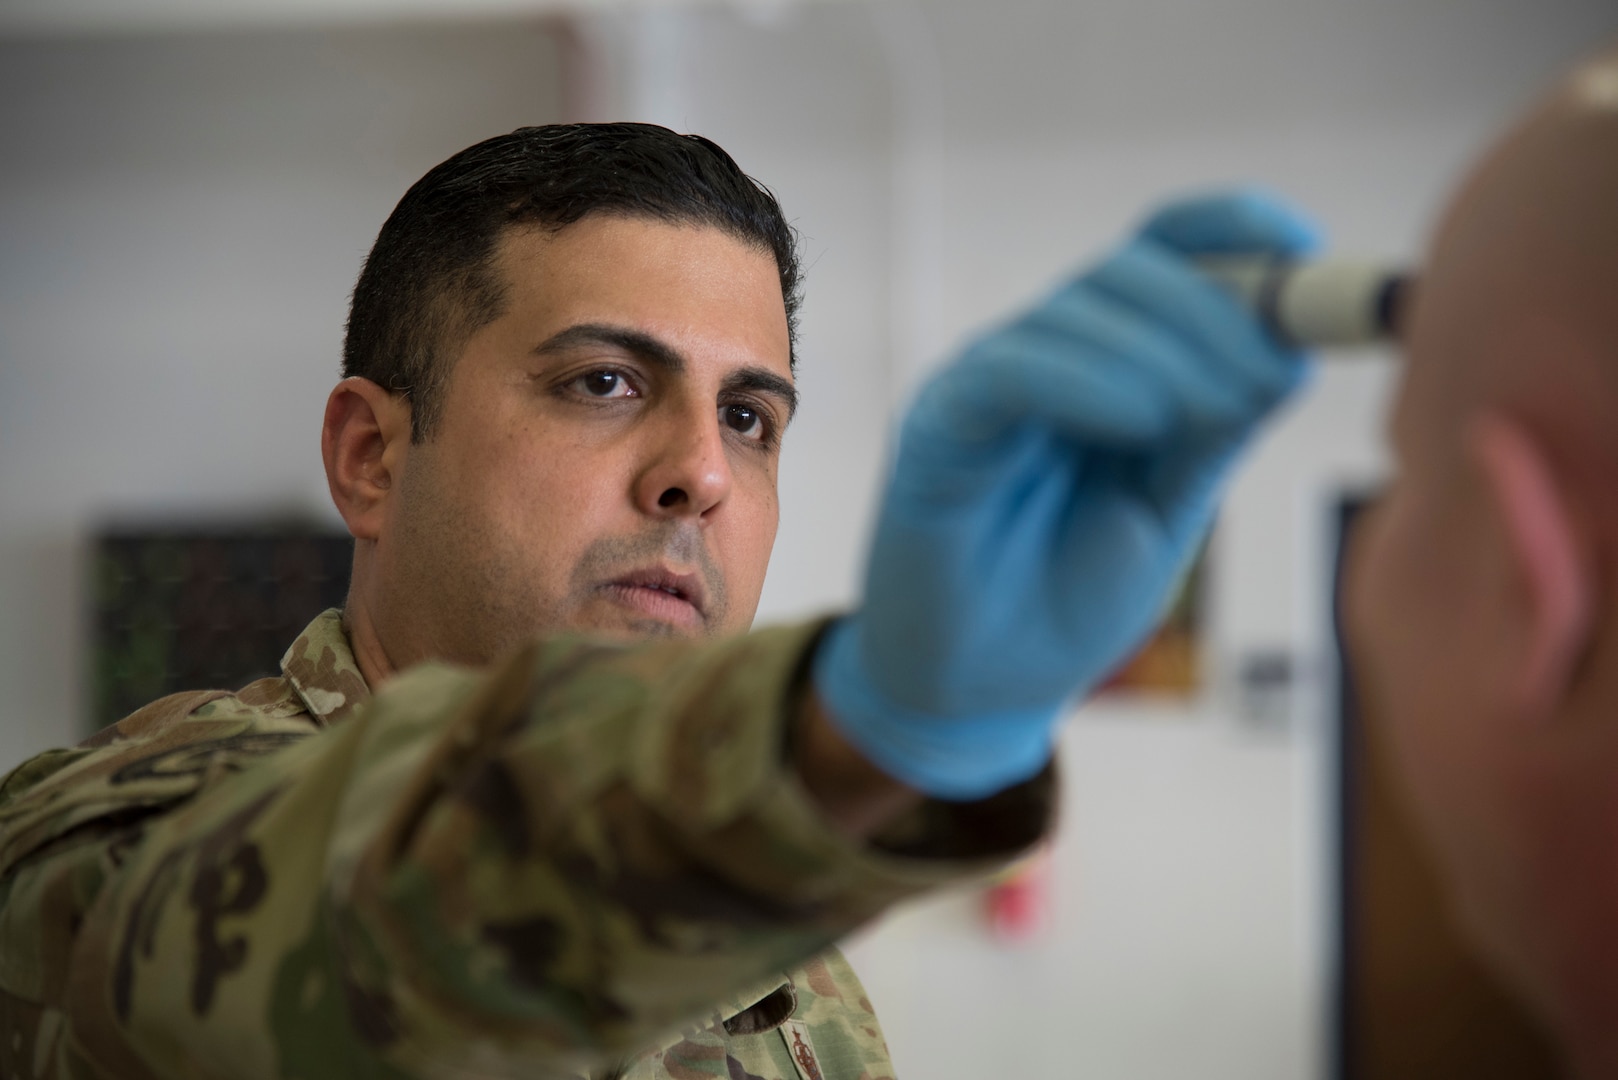 New Jersey Air National Guard Tech. Sgt. Emilio E. Gonzalez, a 108th Medical Group public health technician, checks the temperature of a Security Forces Airman at Joint Base McGuire-Dix-Lakehurst, N.J., March 19, 2020. The medical group screened members for possible fever, a common symptom of COVID-19, before being put on state active duty orders